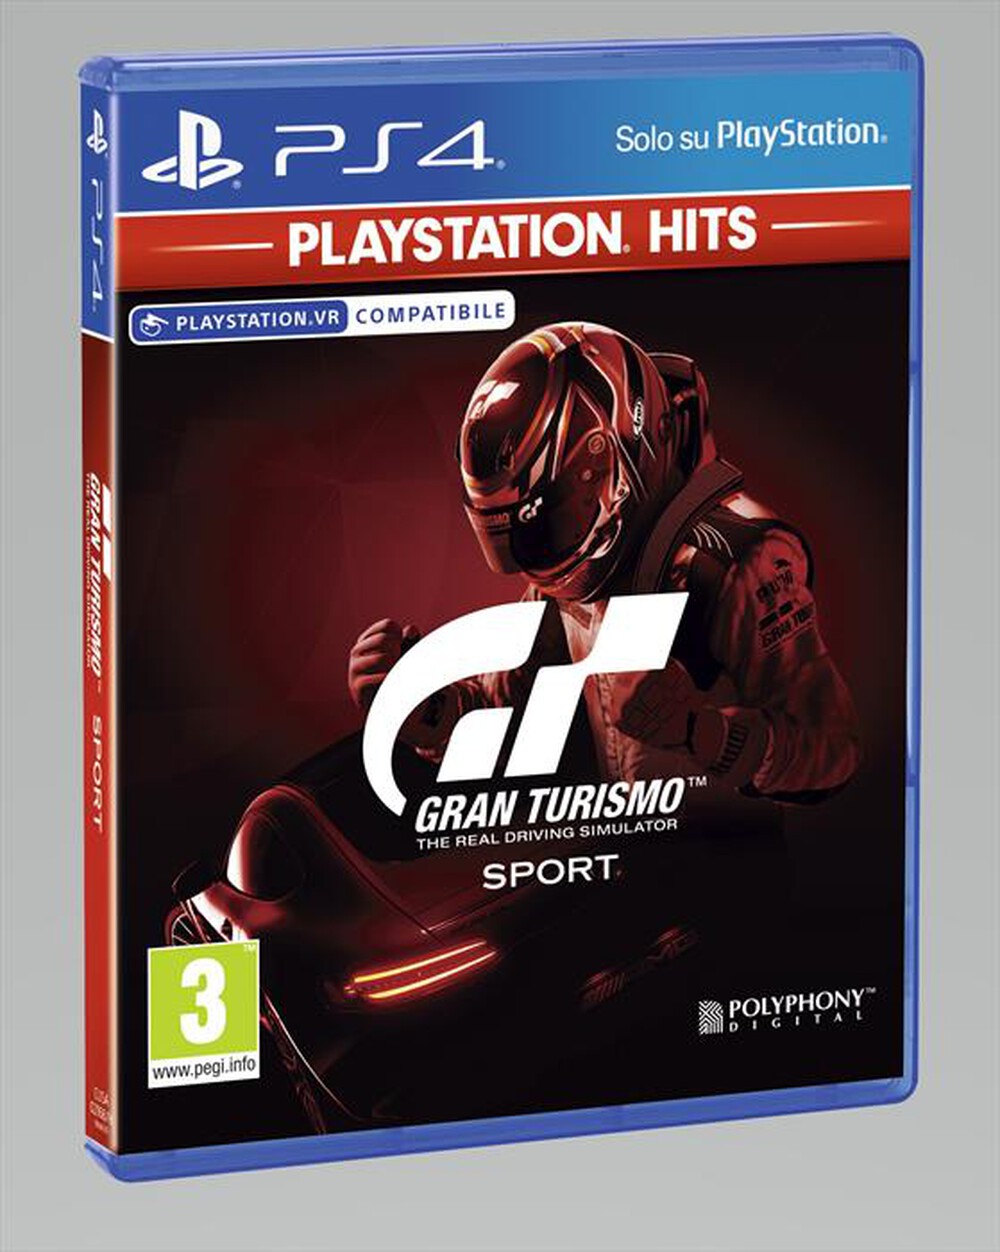 "SONY COMPUTER - GT SPORT HITS PS4"